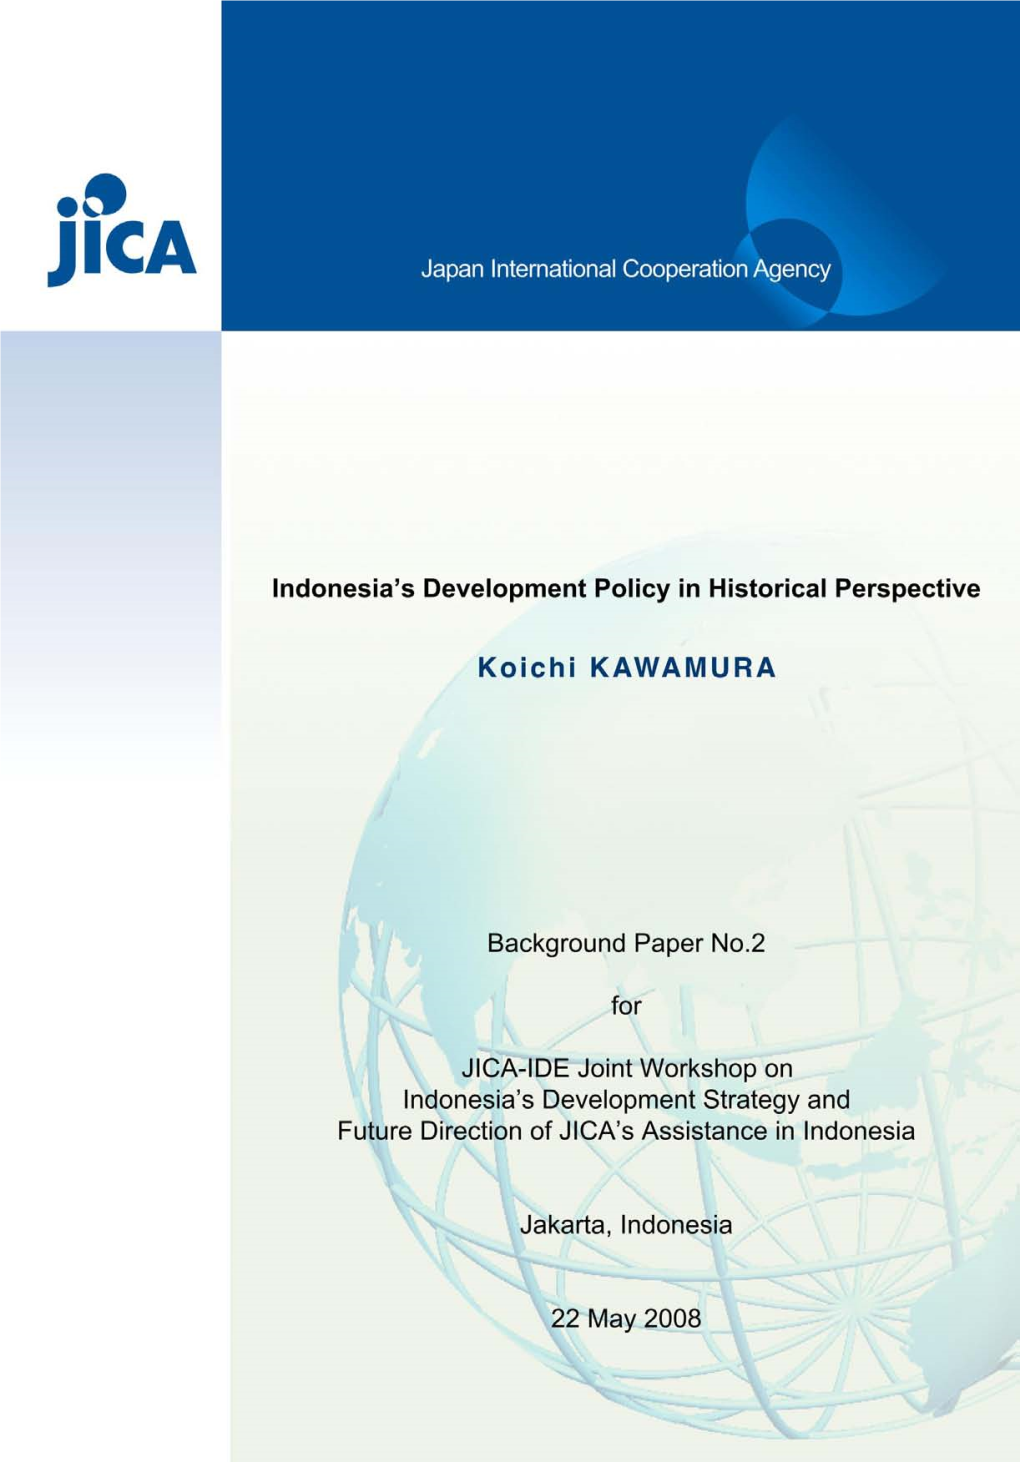 Indonesia's Development Policy in Historical Perspective